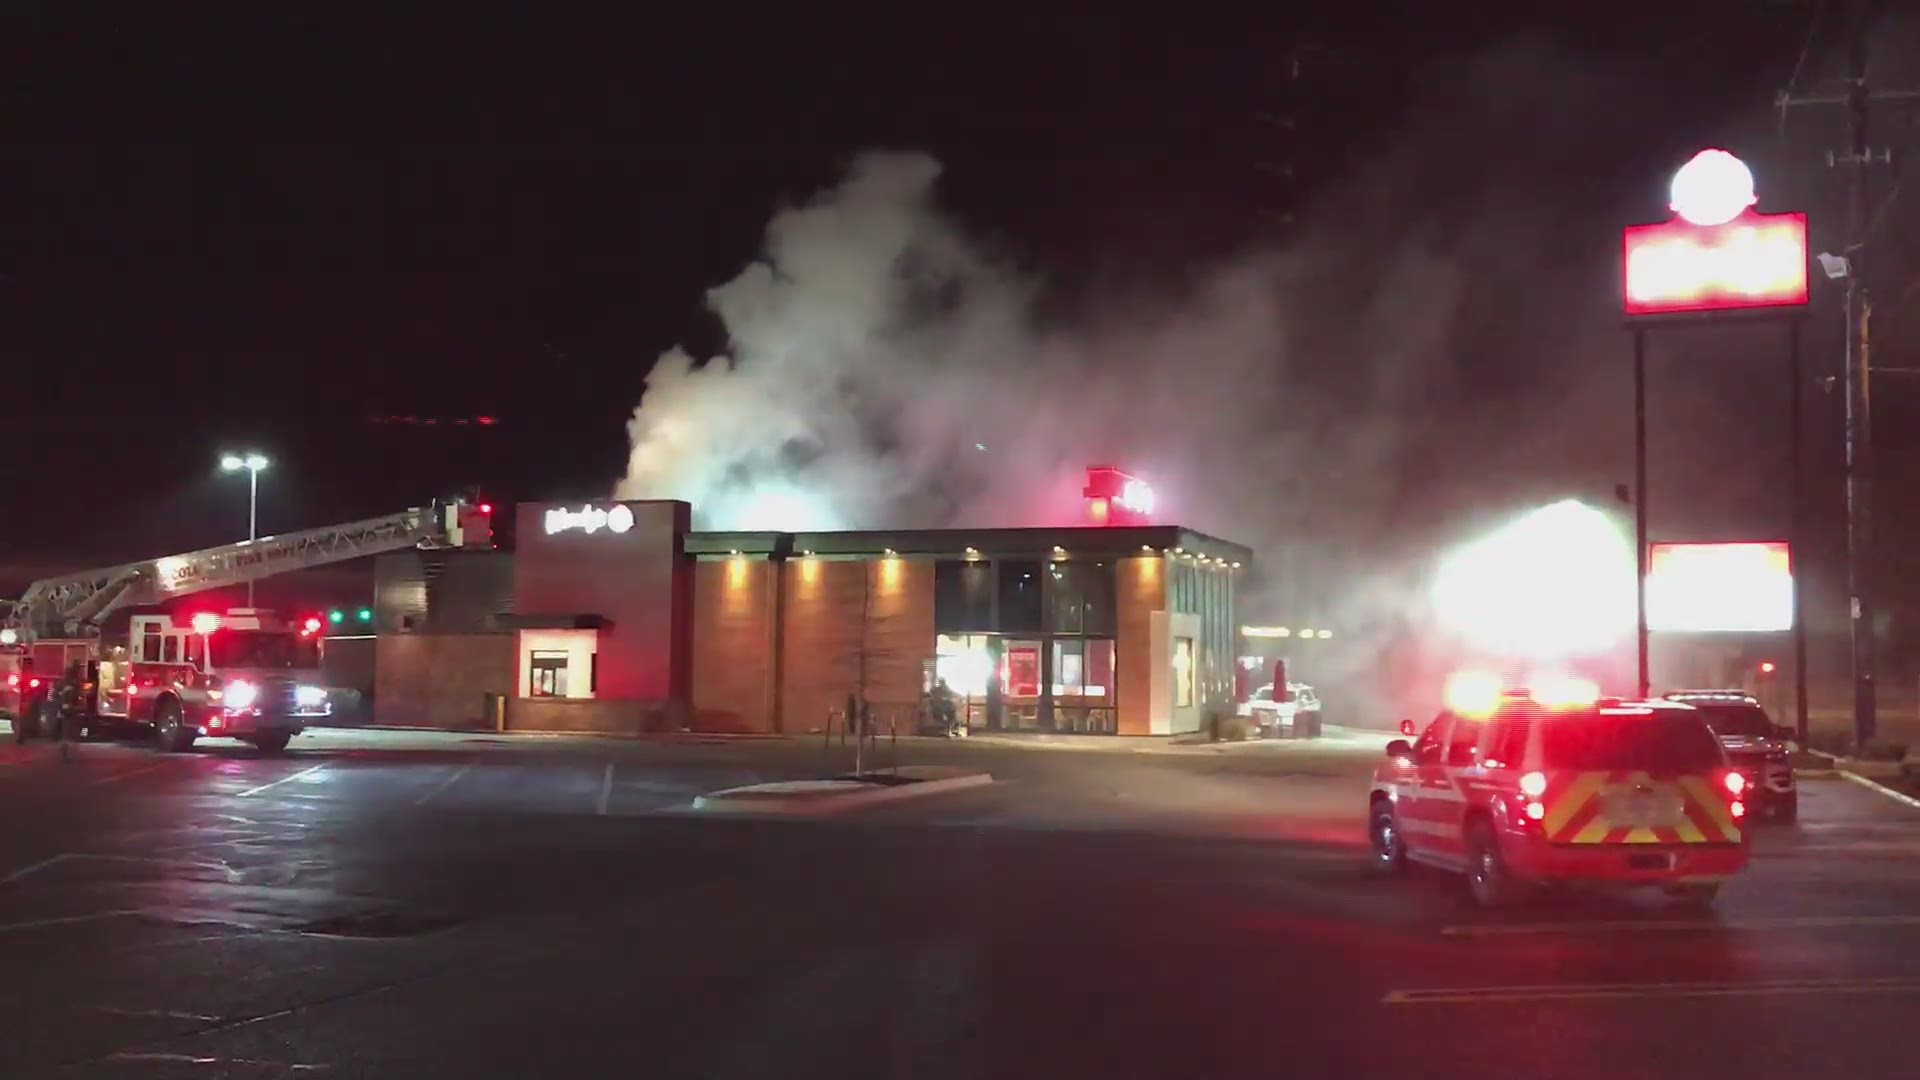 A Wendy's restaurant in Columbia caught fire Sunday night, causing an unknown about of damage to the business.